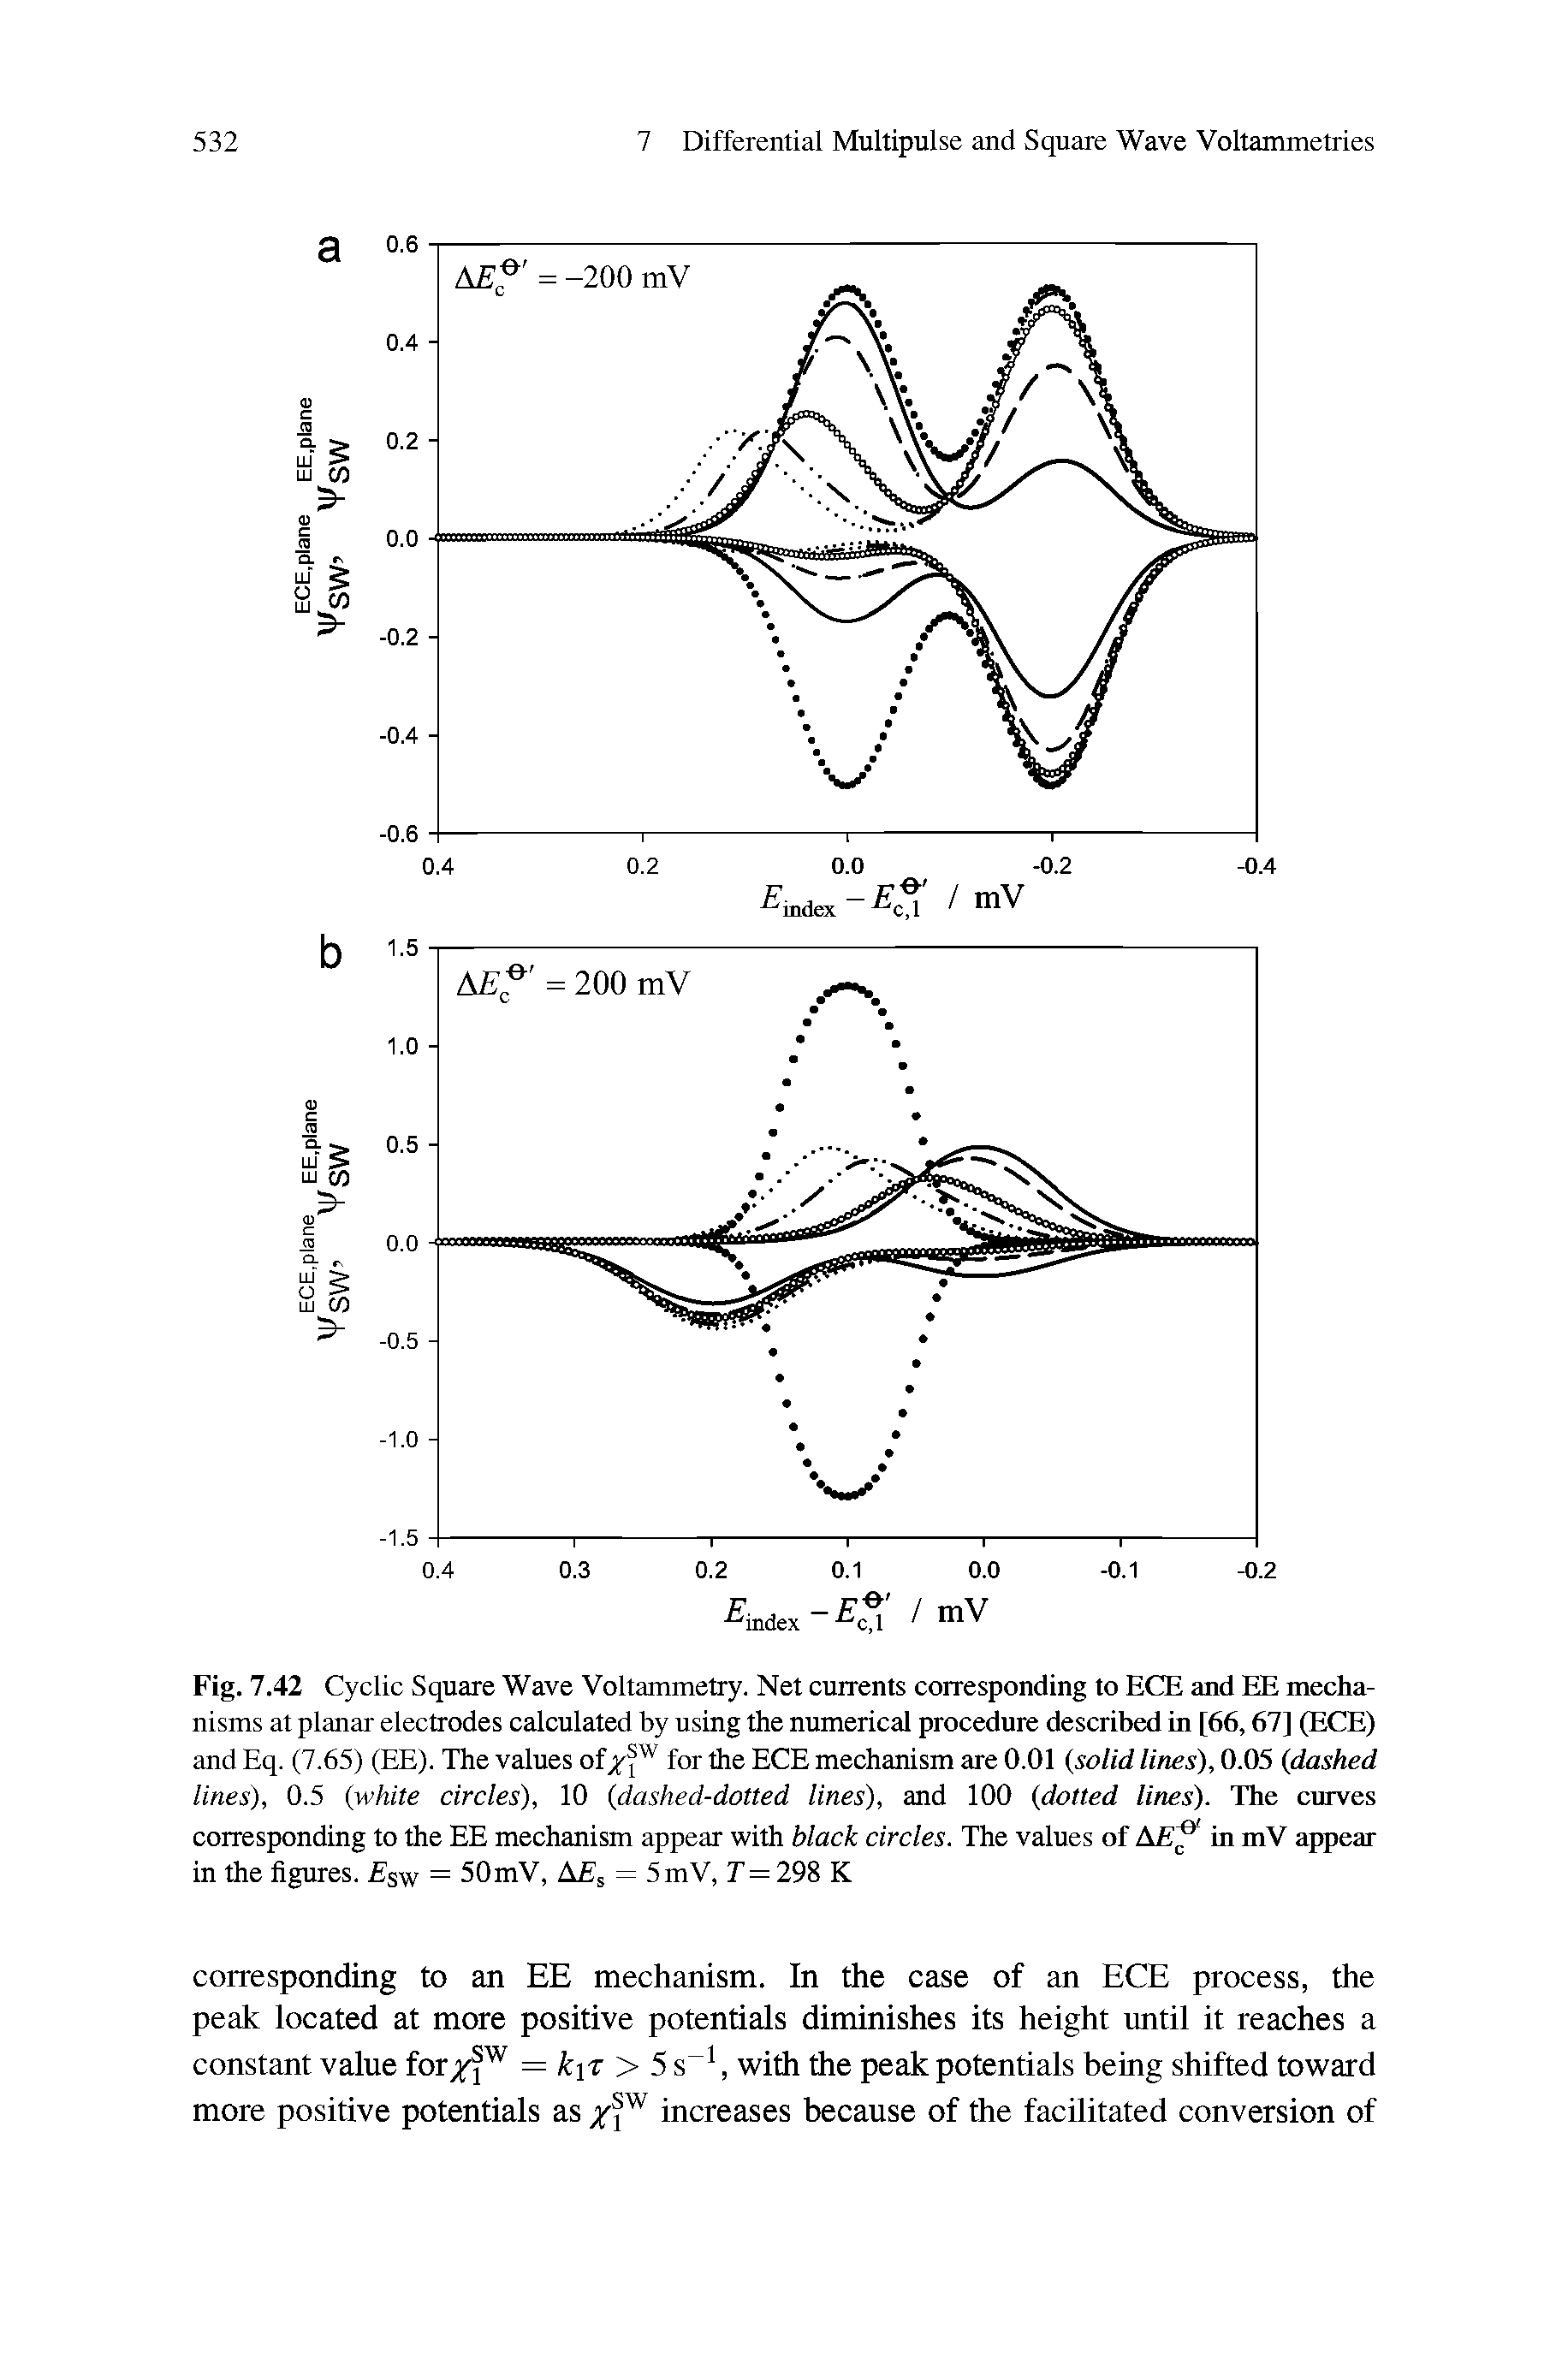 Fig. 7.42 Cyclic Square Wave Voltammetry. Net currents corresponding to ECE and EE mechanisms at planar electrodes calculated by using the numerical procedure described in [66,67] (ECE) and Eq. (7.65) (EE). The values of fw for the ECE mechanism are 0.01 (solid lines), 0.05 (dashed lines), 0.5 (white circles), 10 (dashed-dotted lines), and 100 (dotted lines). The curves corresponding to the EE mechanism appear with black circles. The values of Ain mV appear in the figures. sw = 50mV, AEs = 5mV, T = 298 K...